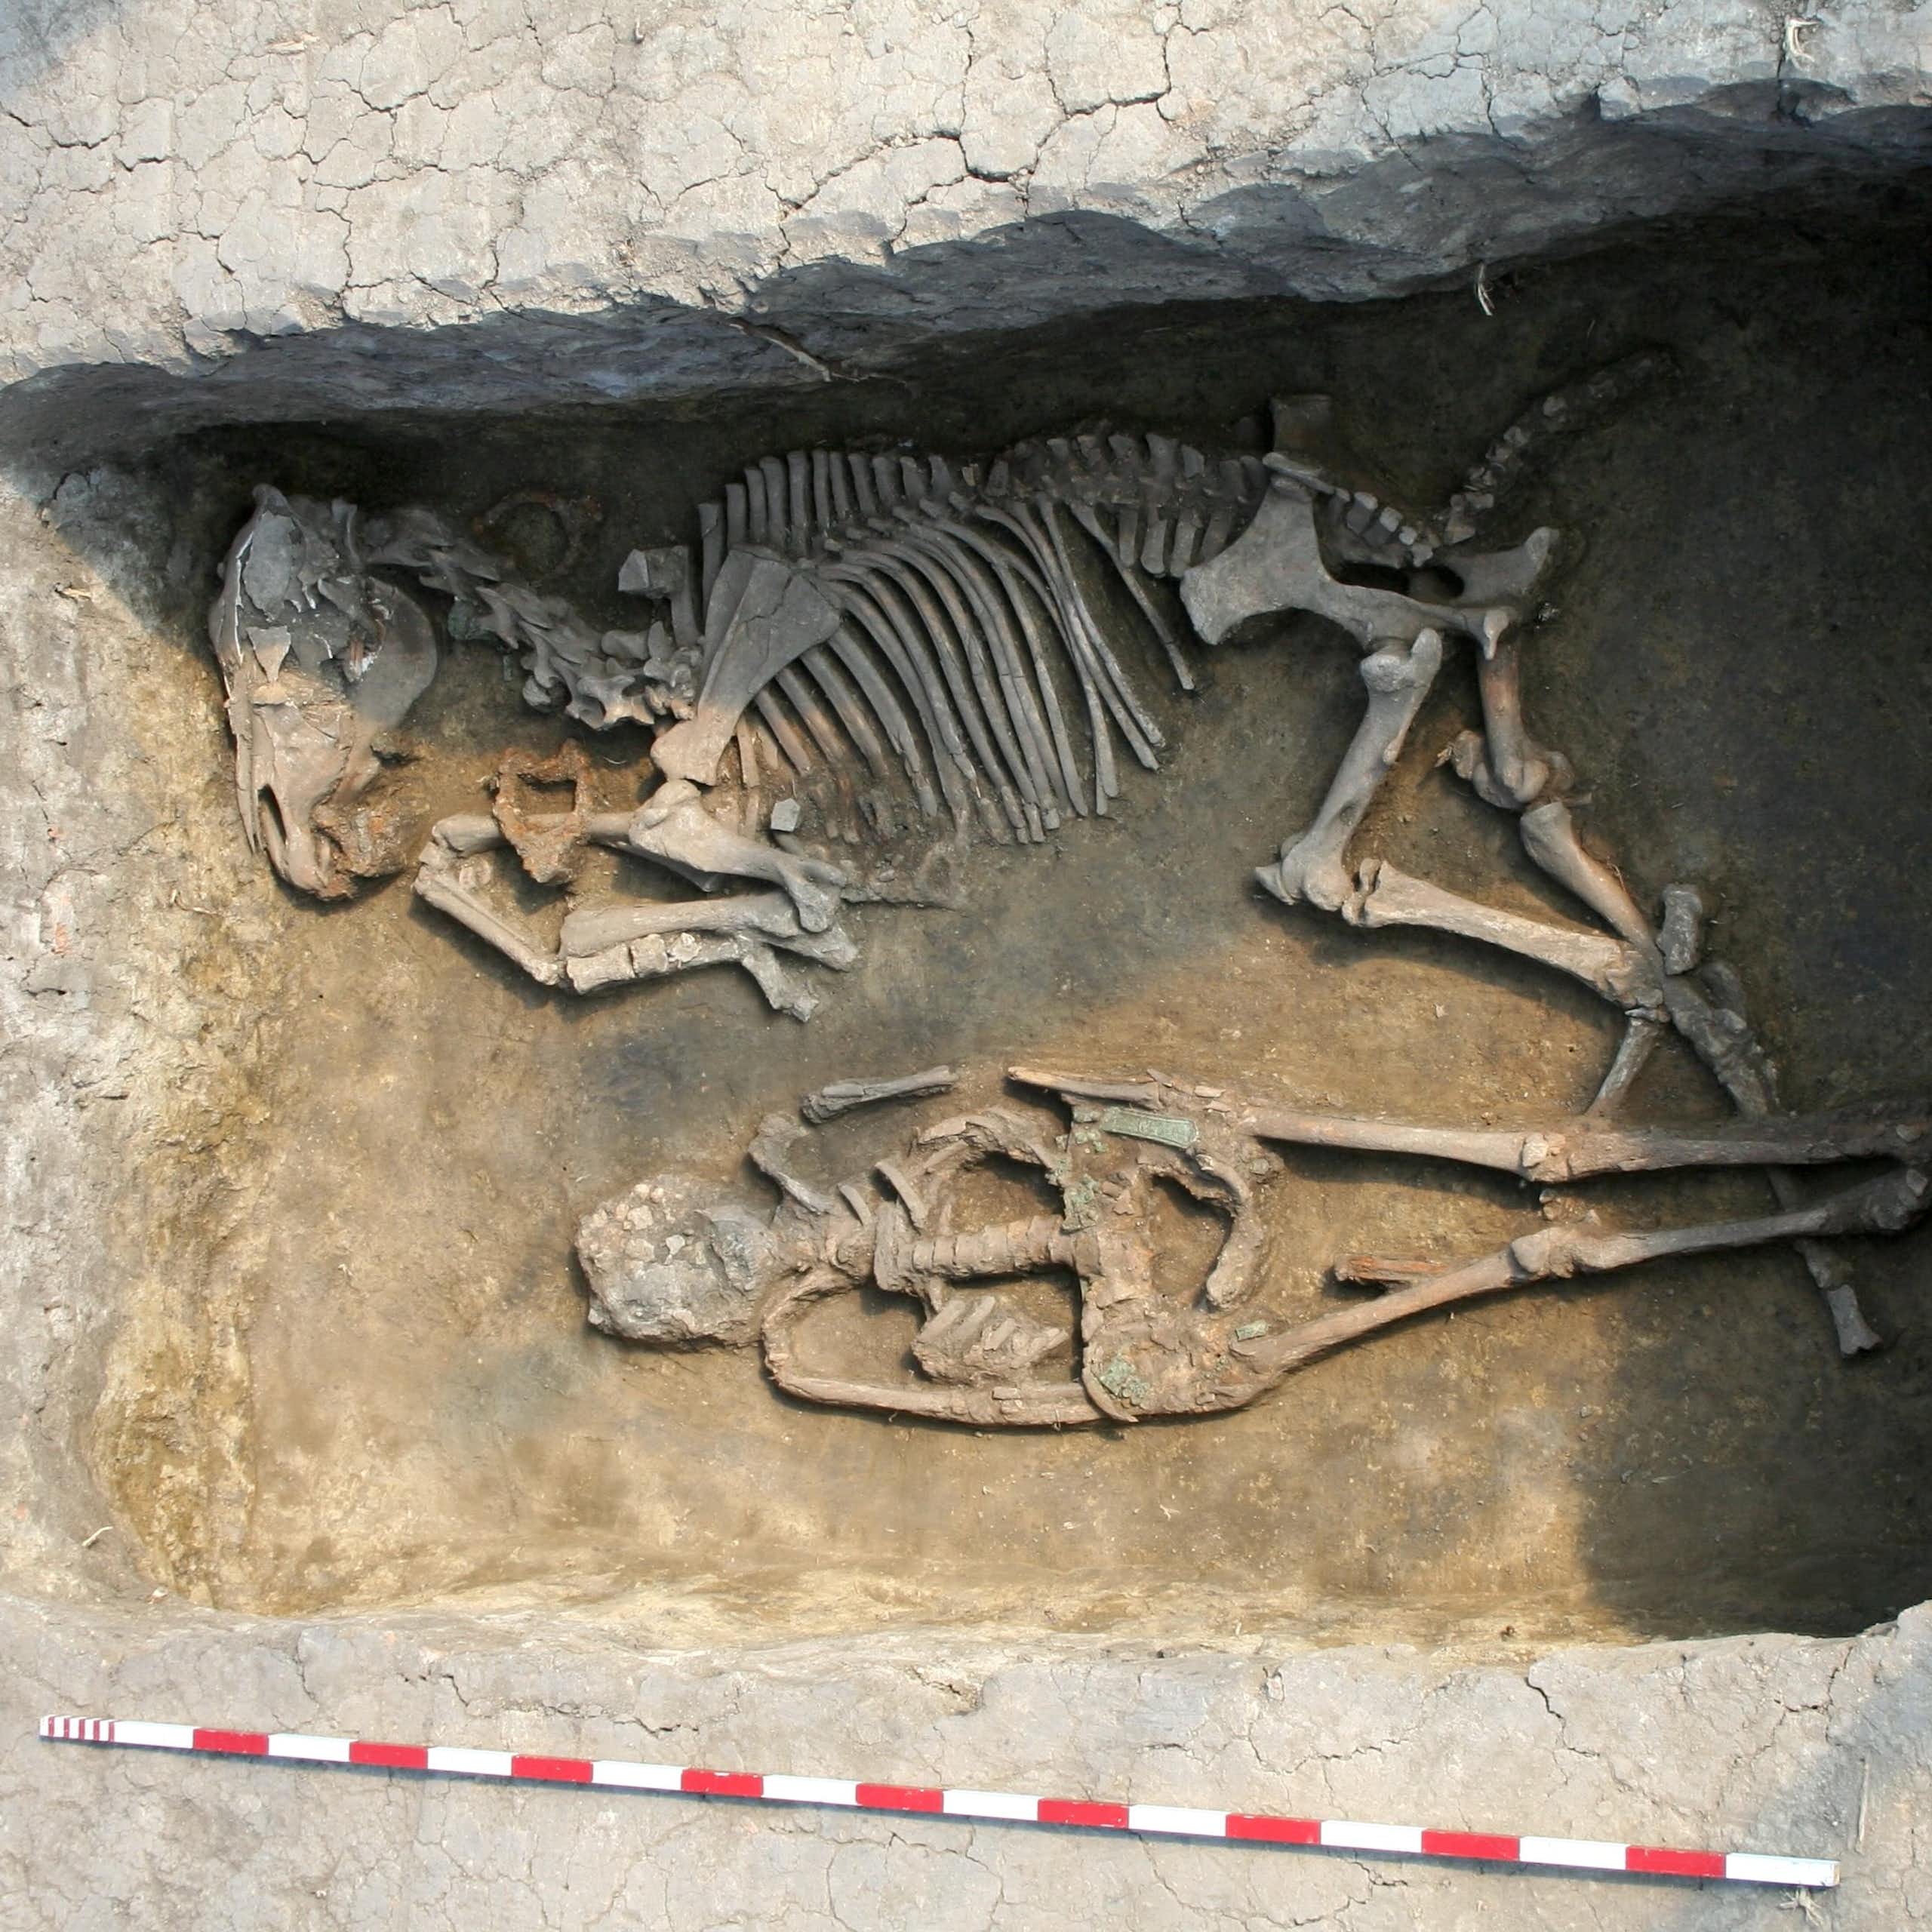 Photo of an excavated grave containing the skeletons of a person and a horse.